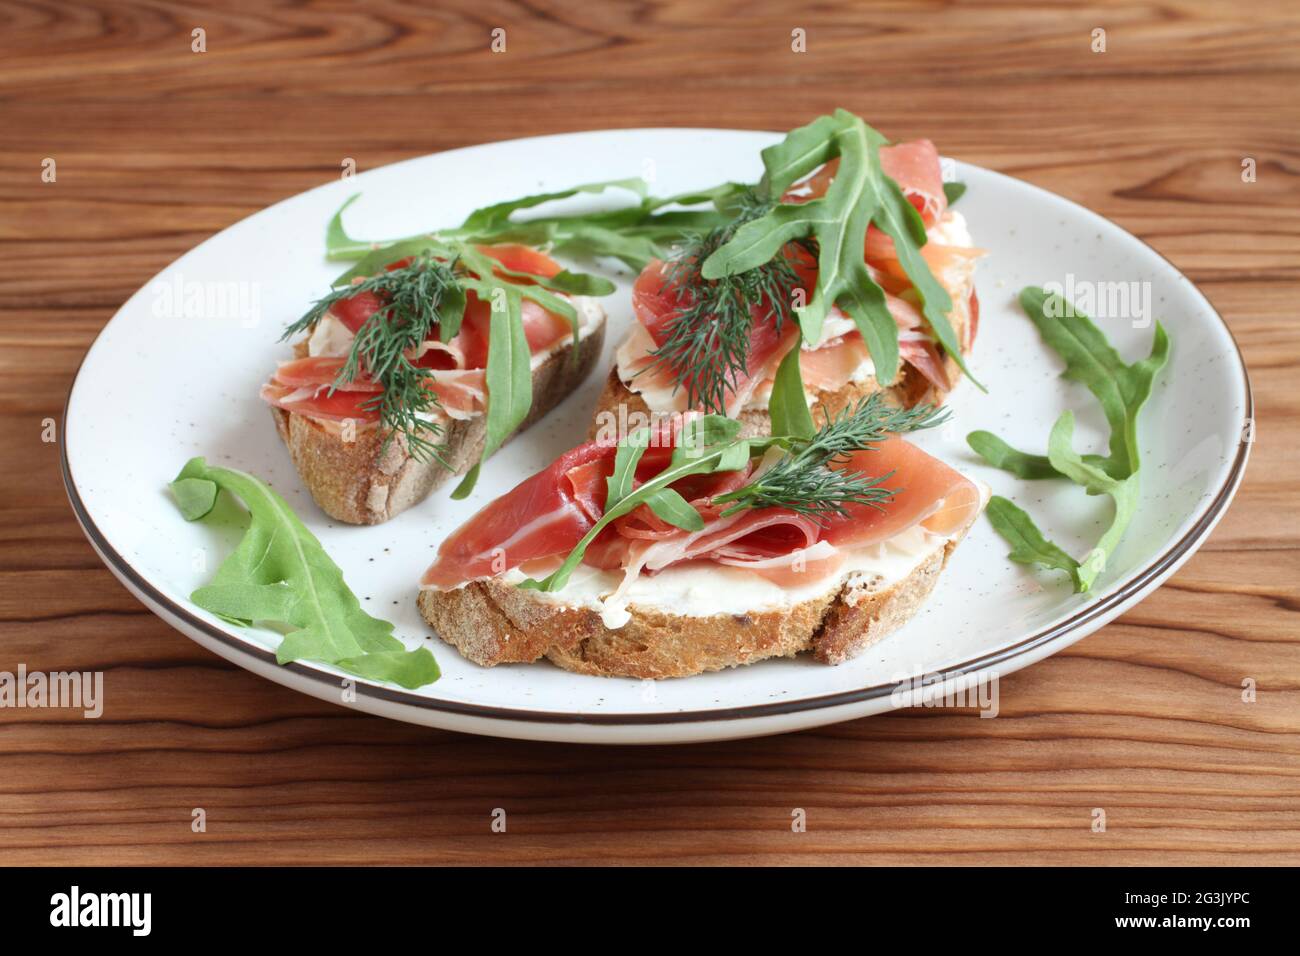 Buckwheat toasts with goat cheese, ham and arugula lying on a white plate on a wooden table.  Closeup Stock Photo